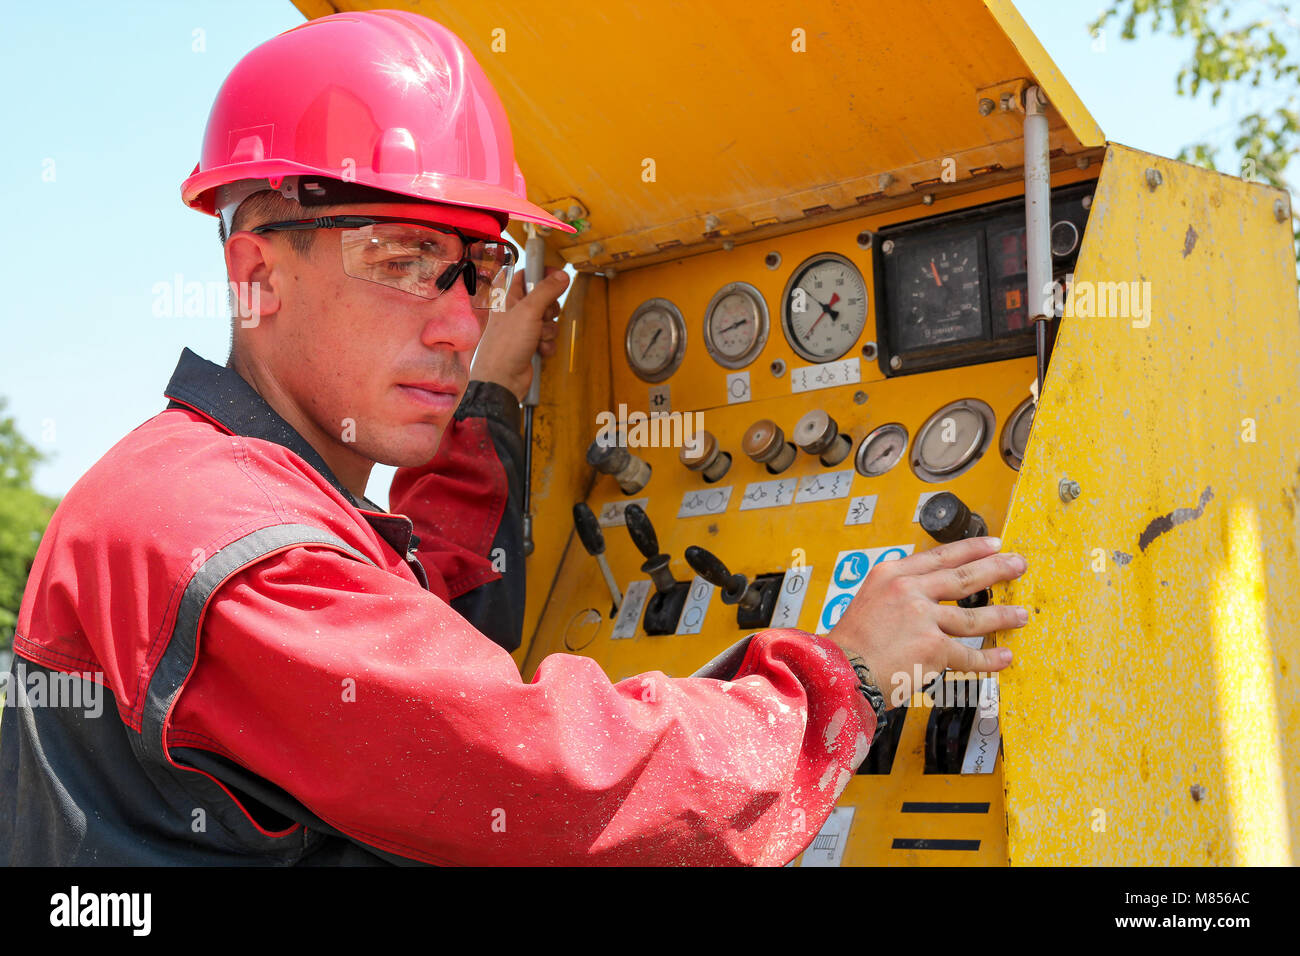 Worker Operating Drilling Rig Control Panel. Oil and gas well drilling worker operates drilling rig machinery. Stock Photo